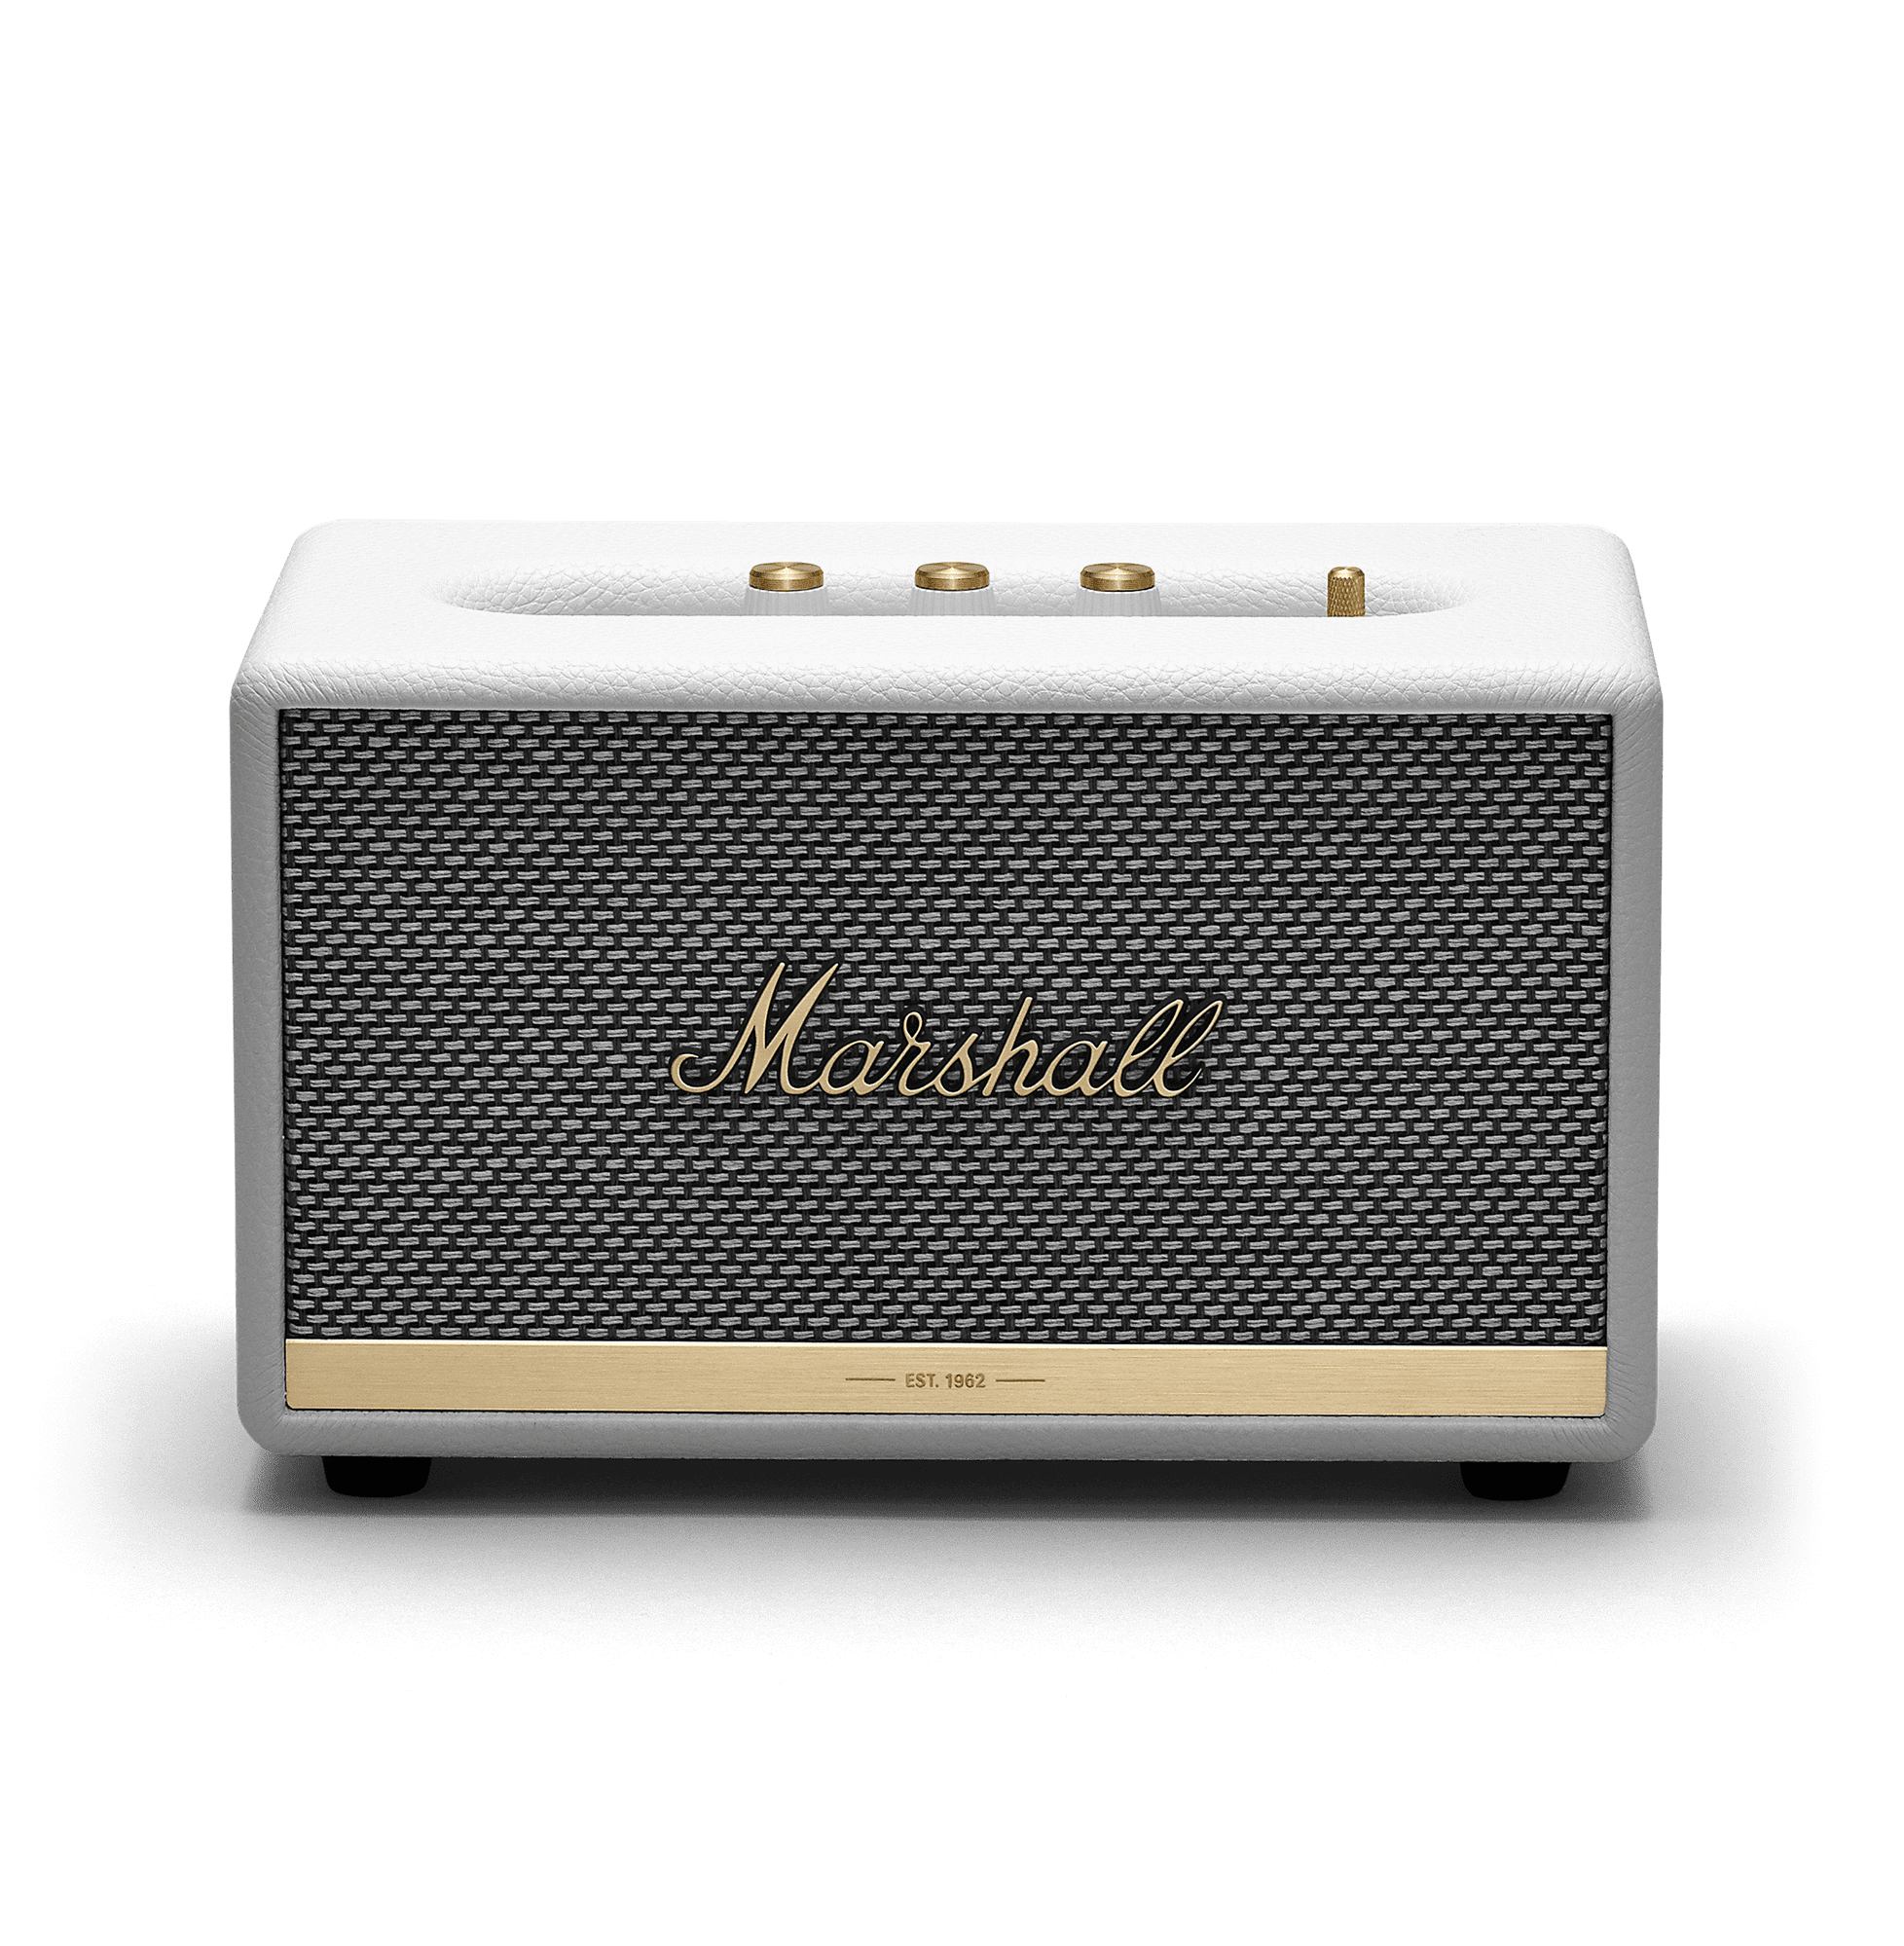 marshall acton bt review